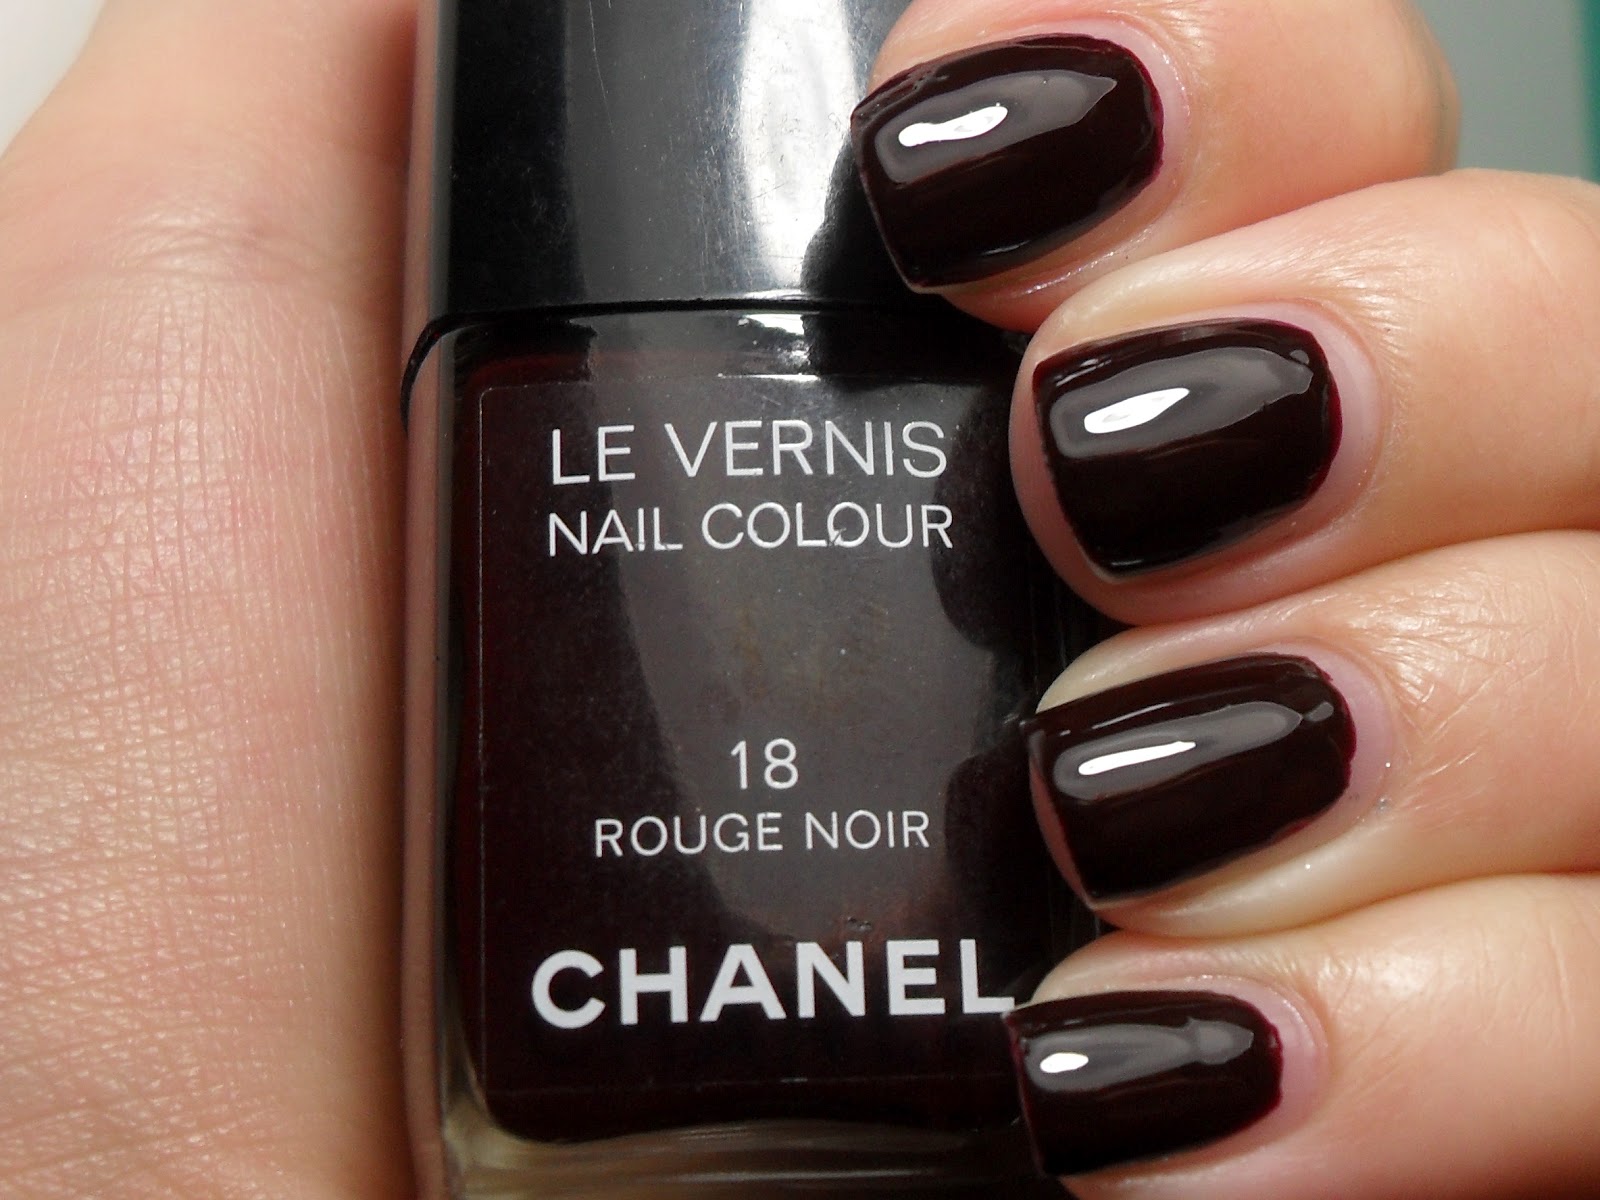 Chanel Le Vernis Longwear Nail Colour in "Vamp" 2024 - wide 4